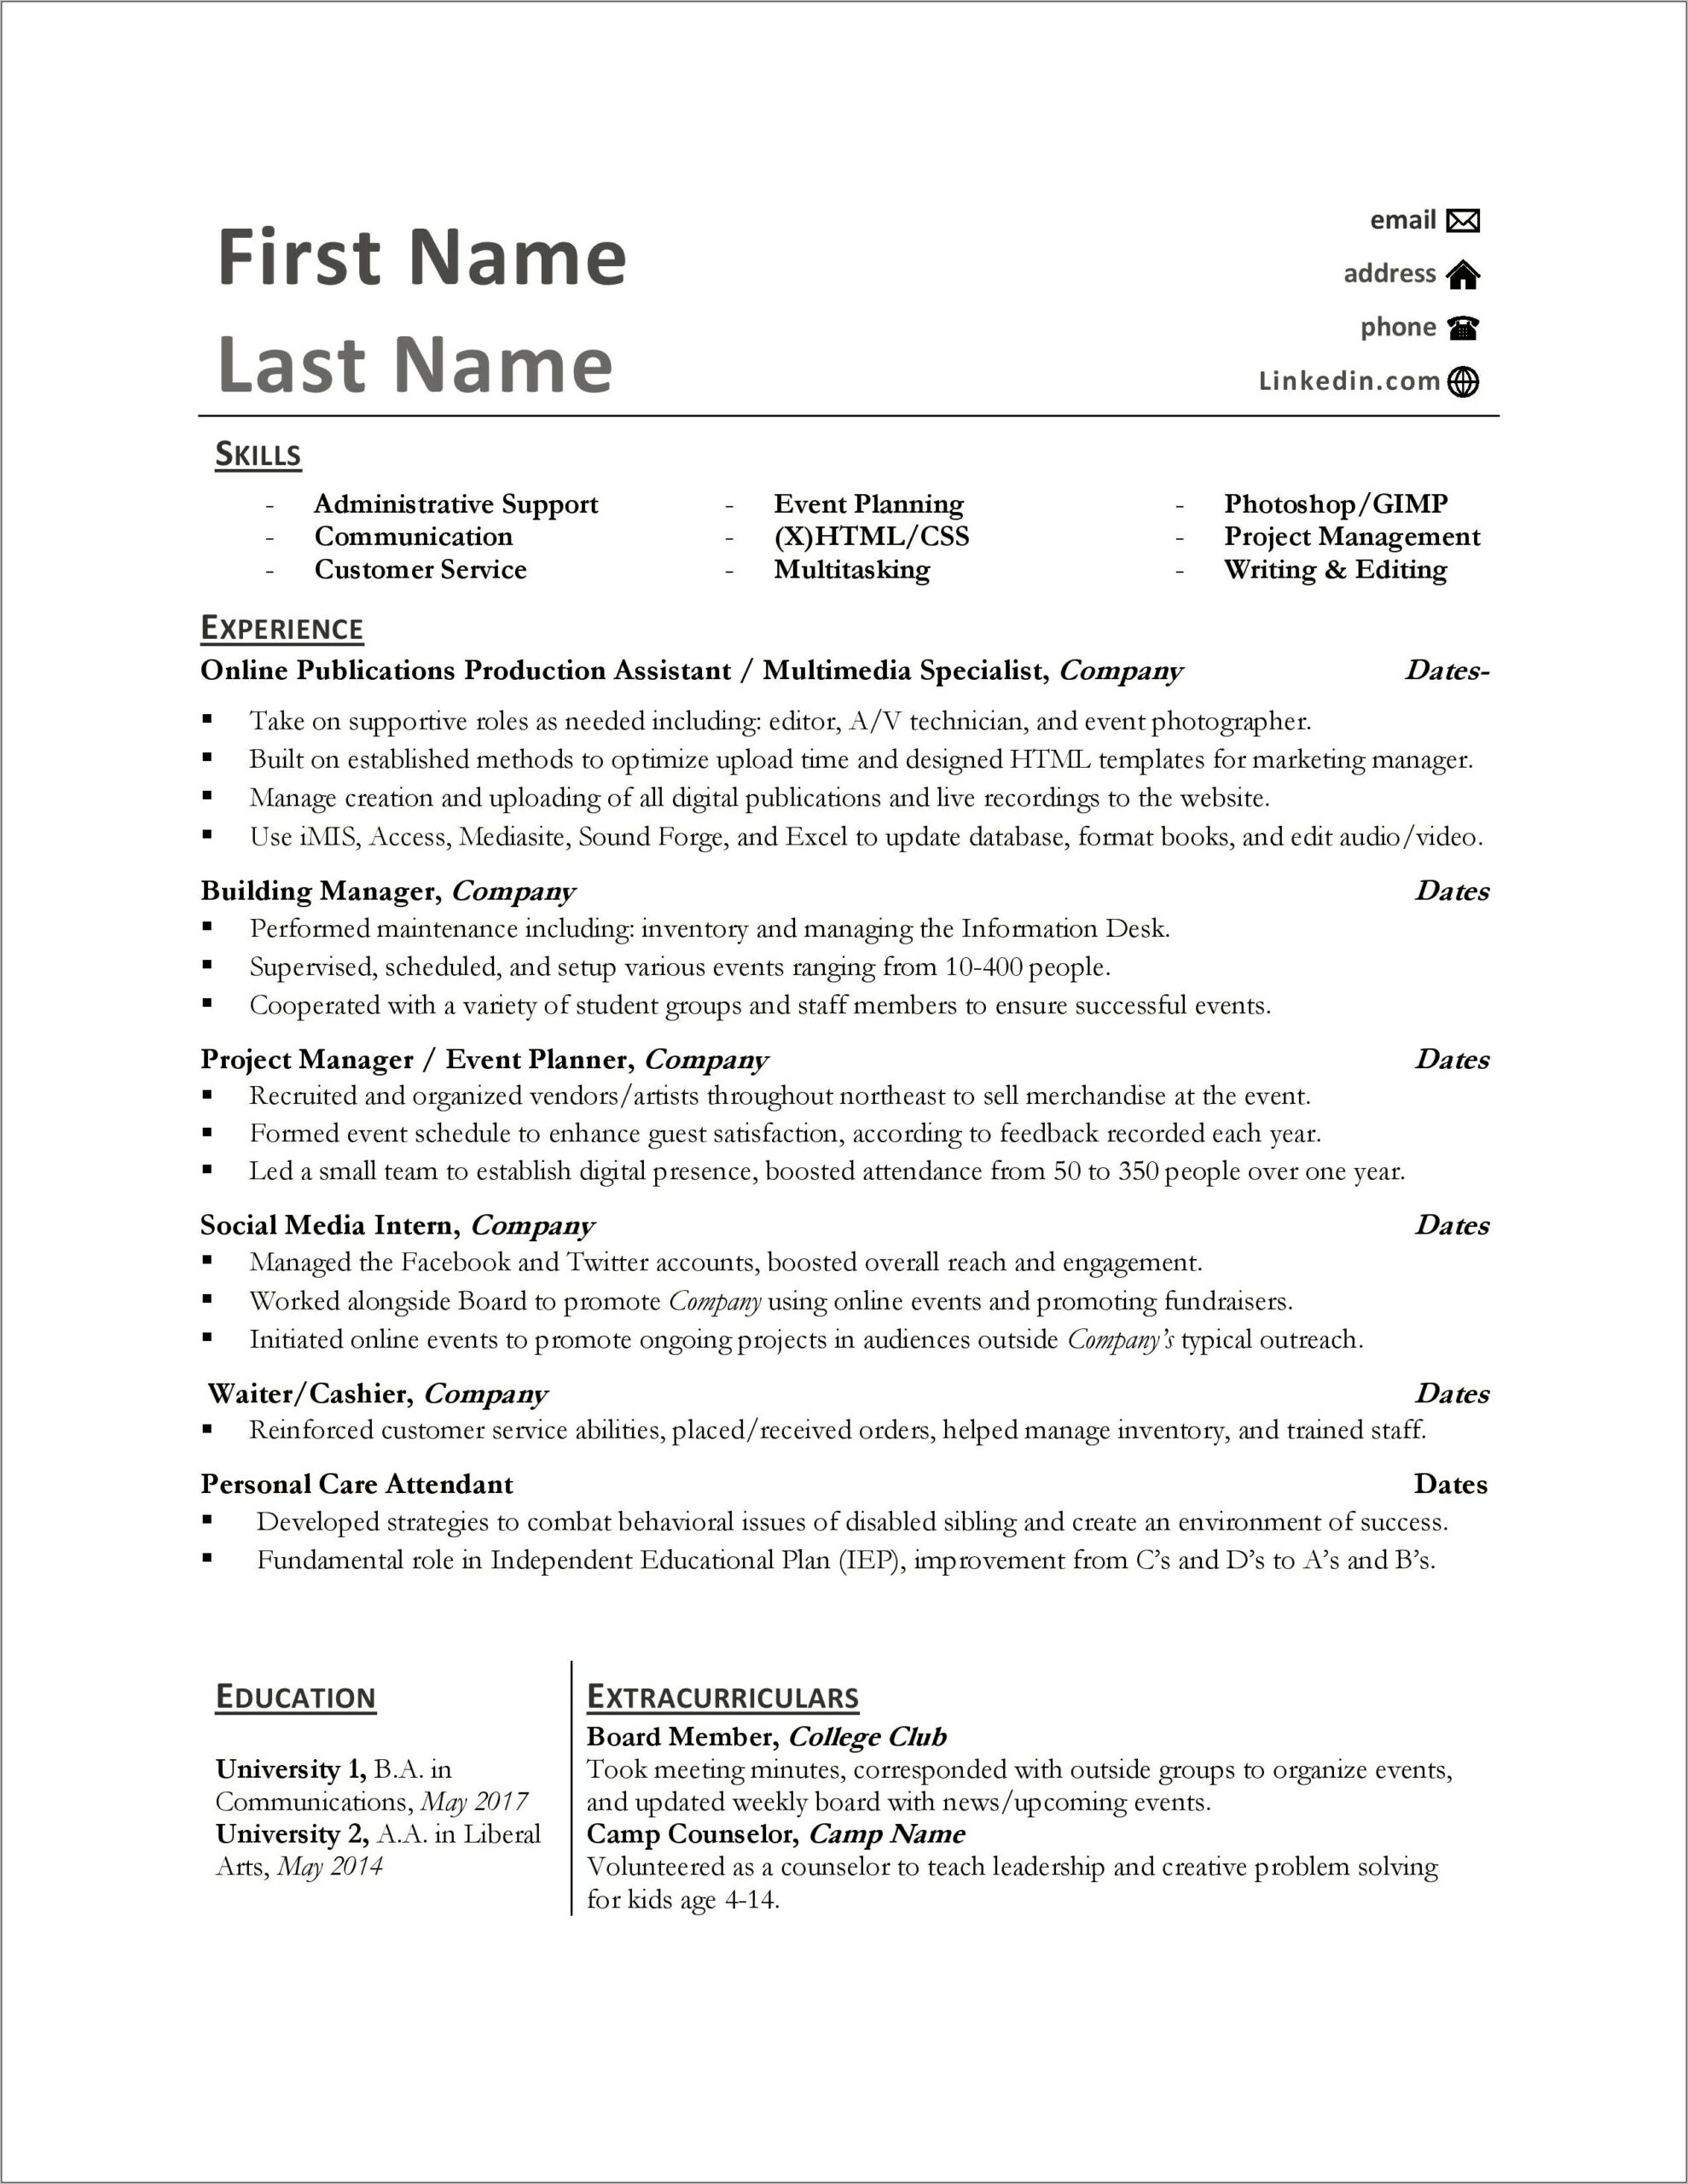 Resume For Different Jobs In Same Company